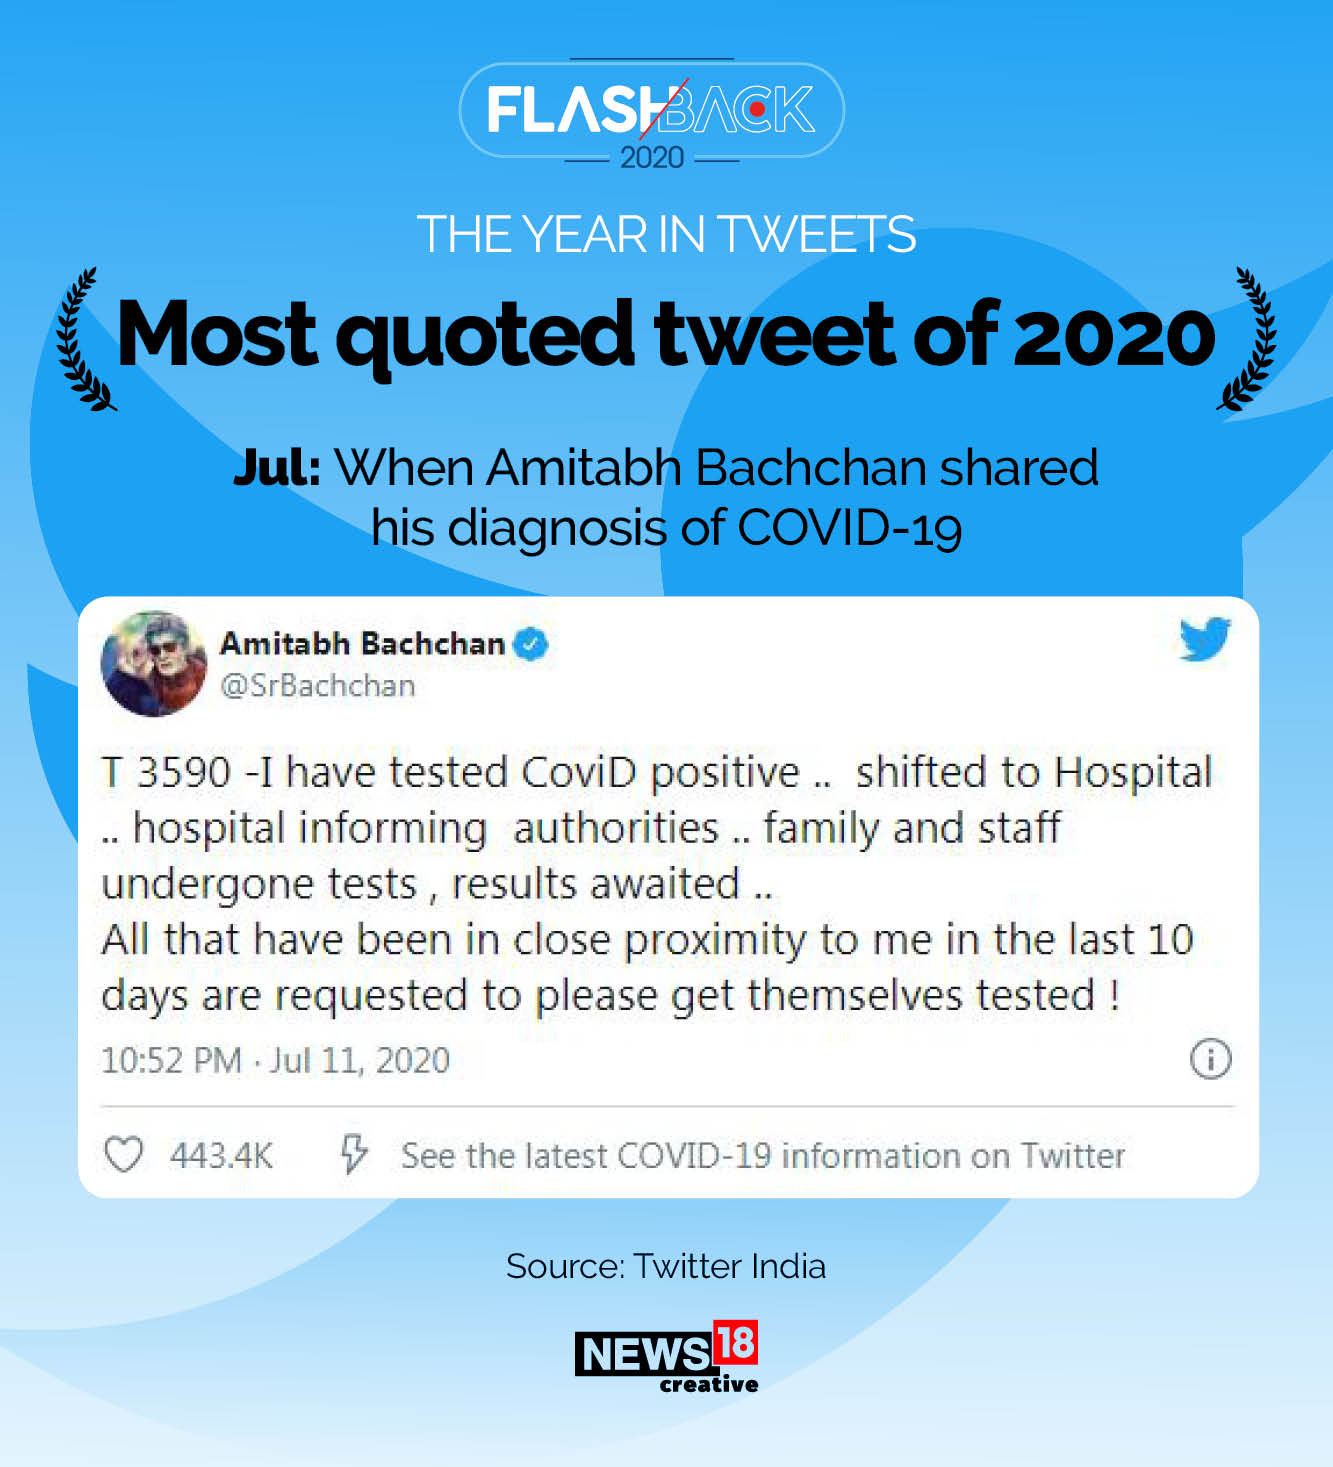 The most retweeted, liked and quoted tweets of 2020 are...